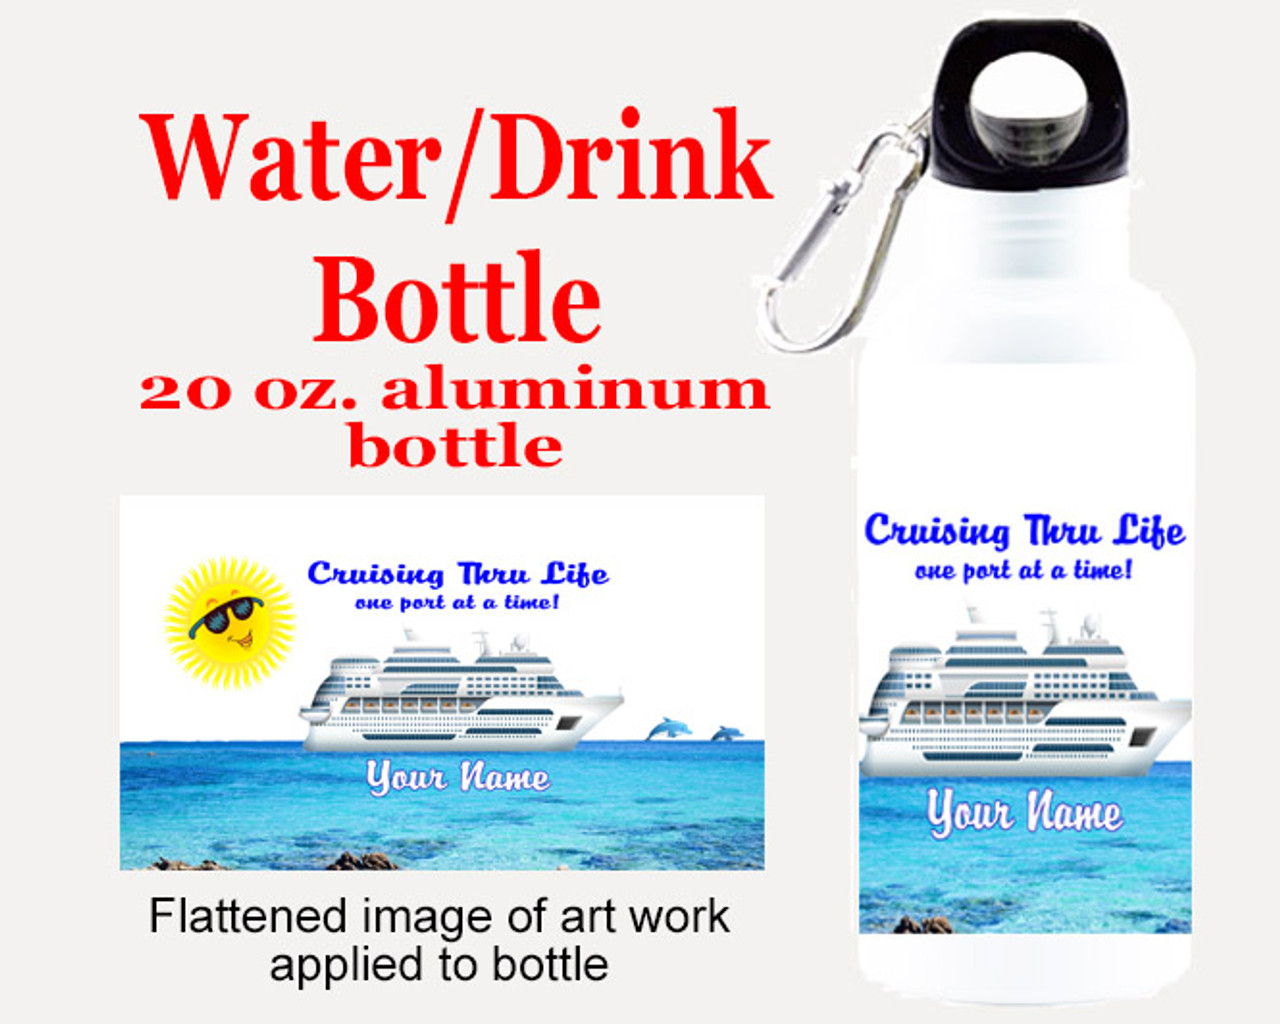 Can You Bring Bottled Water On A Cruise?